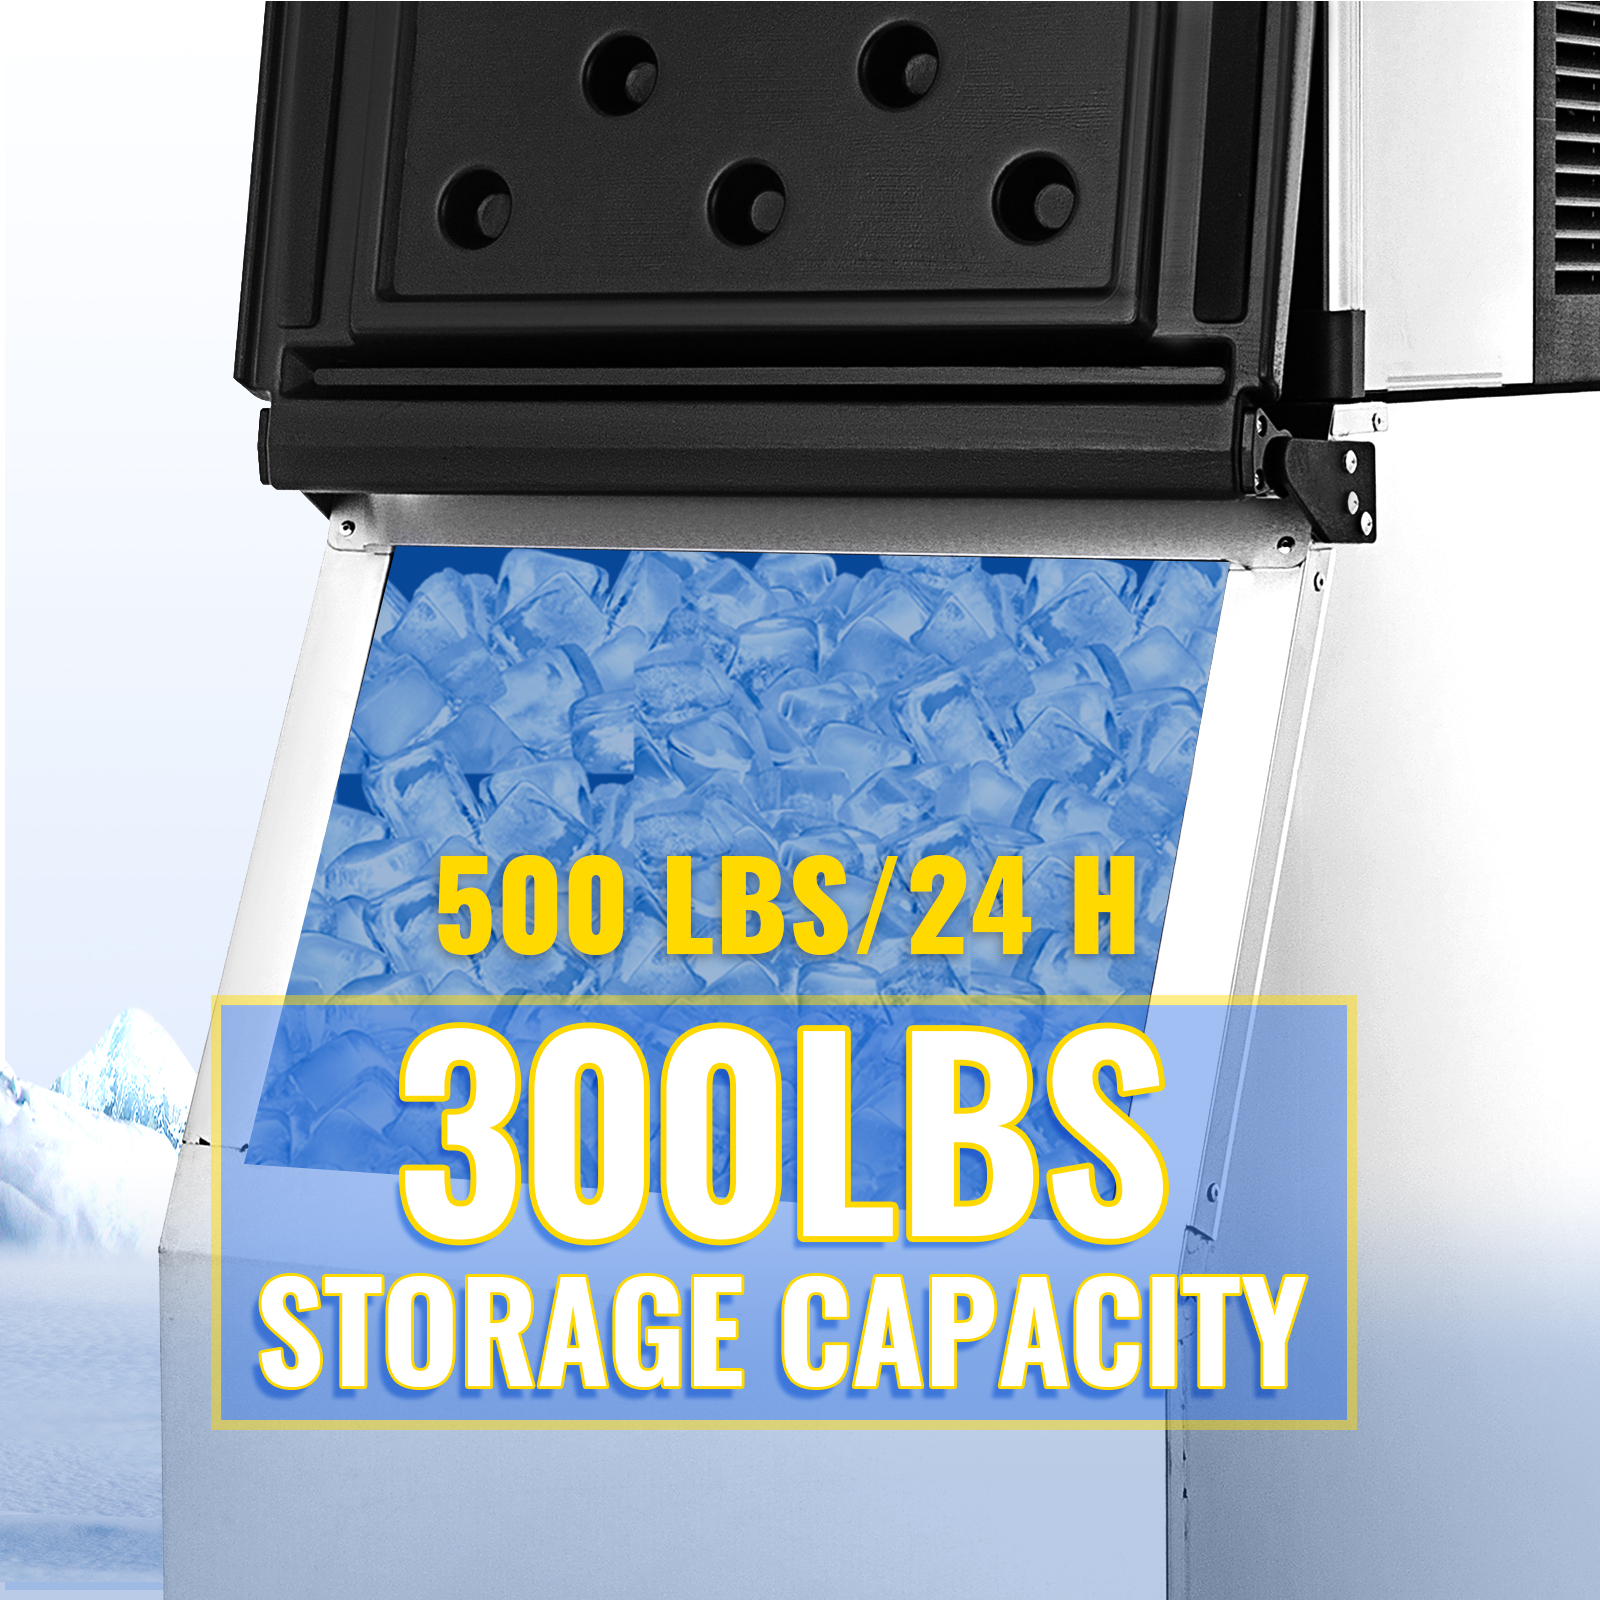 https://d2qc09rl1gfuof.cloudfront.net/product/ZBJLB-400T-ZH0001/commercial-ice-maker-m100-2.jpg